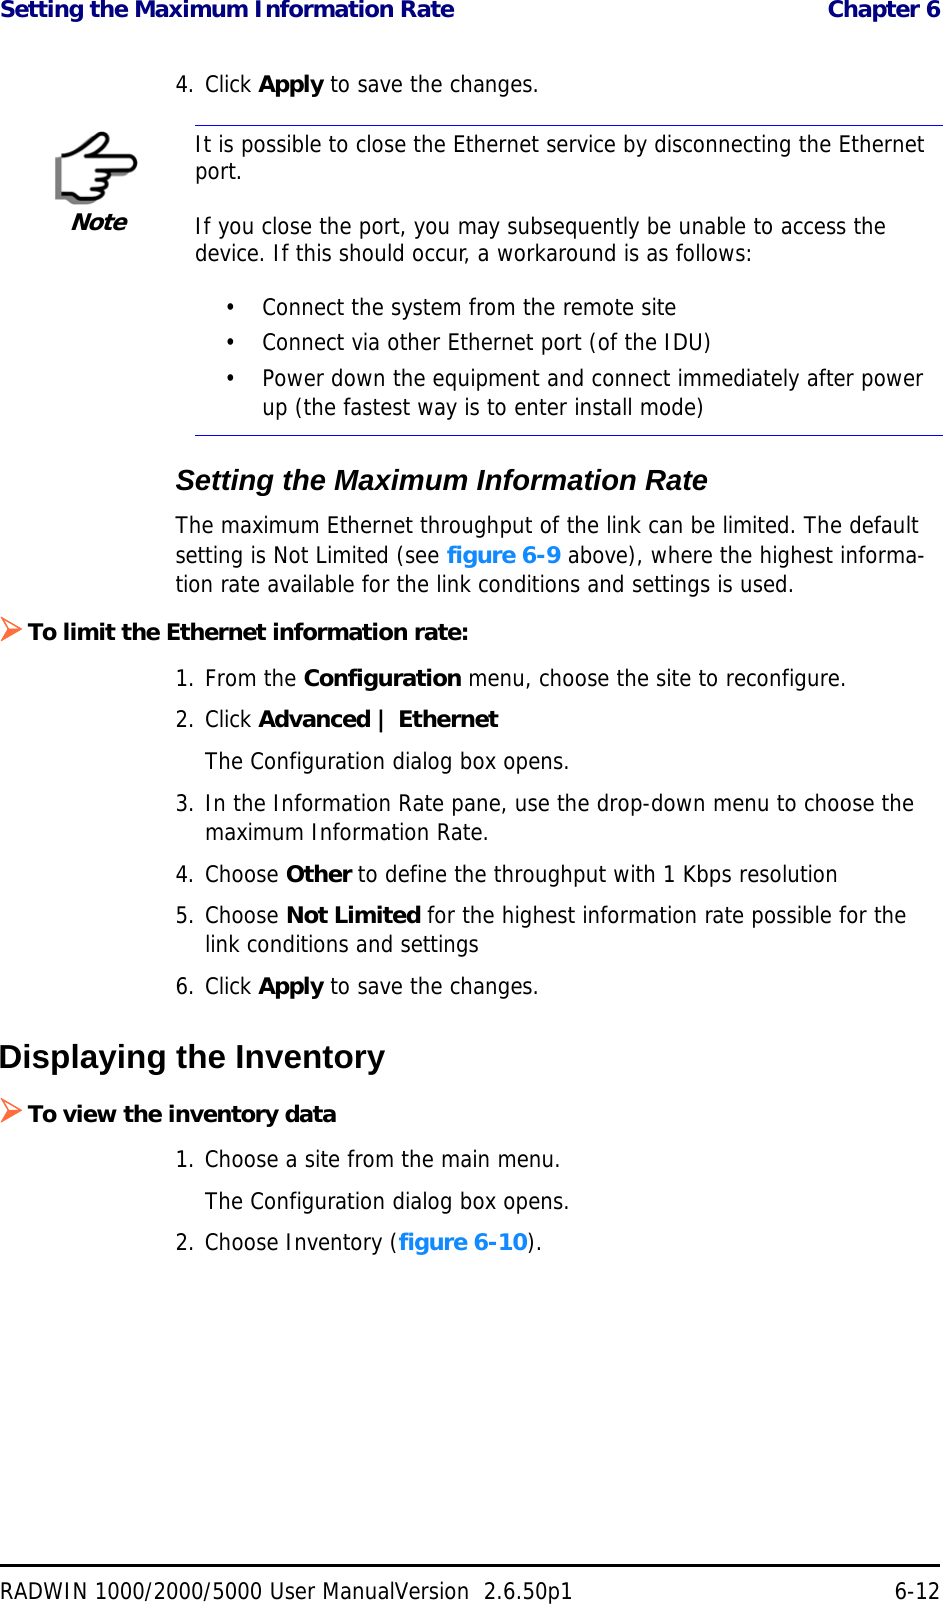 Setting the Maximum Information Rate  Chapter 6RADWIN 1000/2000/5000 User ManualVersion  2.6.50p1 6-124. Click Apply to save the changes.Setting the Maximum Information RateThe maximum Ethernet throughput of the link can be limited. The default setting is Not Limited (see figure 6-9 above), where the highest informa-tion rate available for the link conditions and settings is used.To limit the Ethernet information rate:1. From the Configuration menu, choose the site to reconfigure.2. Click Advanced | EthernetThe Configuration dialog box opens.3. In the Information Rate pane, use the drop-down menu to choose the maximum Information Rate.4. Choose Other to define the throughput with 1 Kbps resolution5. Choose Not Limited for the highest information rate possible for the link conditions and settings6. Click Apply to save the changes.Displaying the InventoryTo view the inventory data1. Choose a site from the main menu.The Configuration dialog box opens.2. Choose Inventory (figure 6-10).NoteIt is possible to close the Ethernet service by disconnecting the Ethernet port.If you close the port, you may subsequently be unable to access the device. If this should occur, a workaround is as follows:• Connect the system from the remote site• Connect via other Ethernet port (of the IDU)• Power down the equipment and connect immediately after power up (the fastest way is to enter install mode)